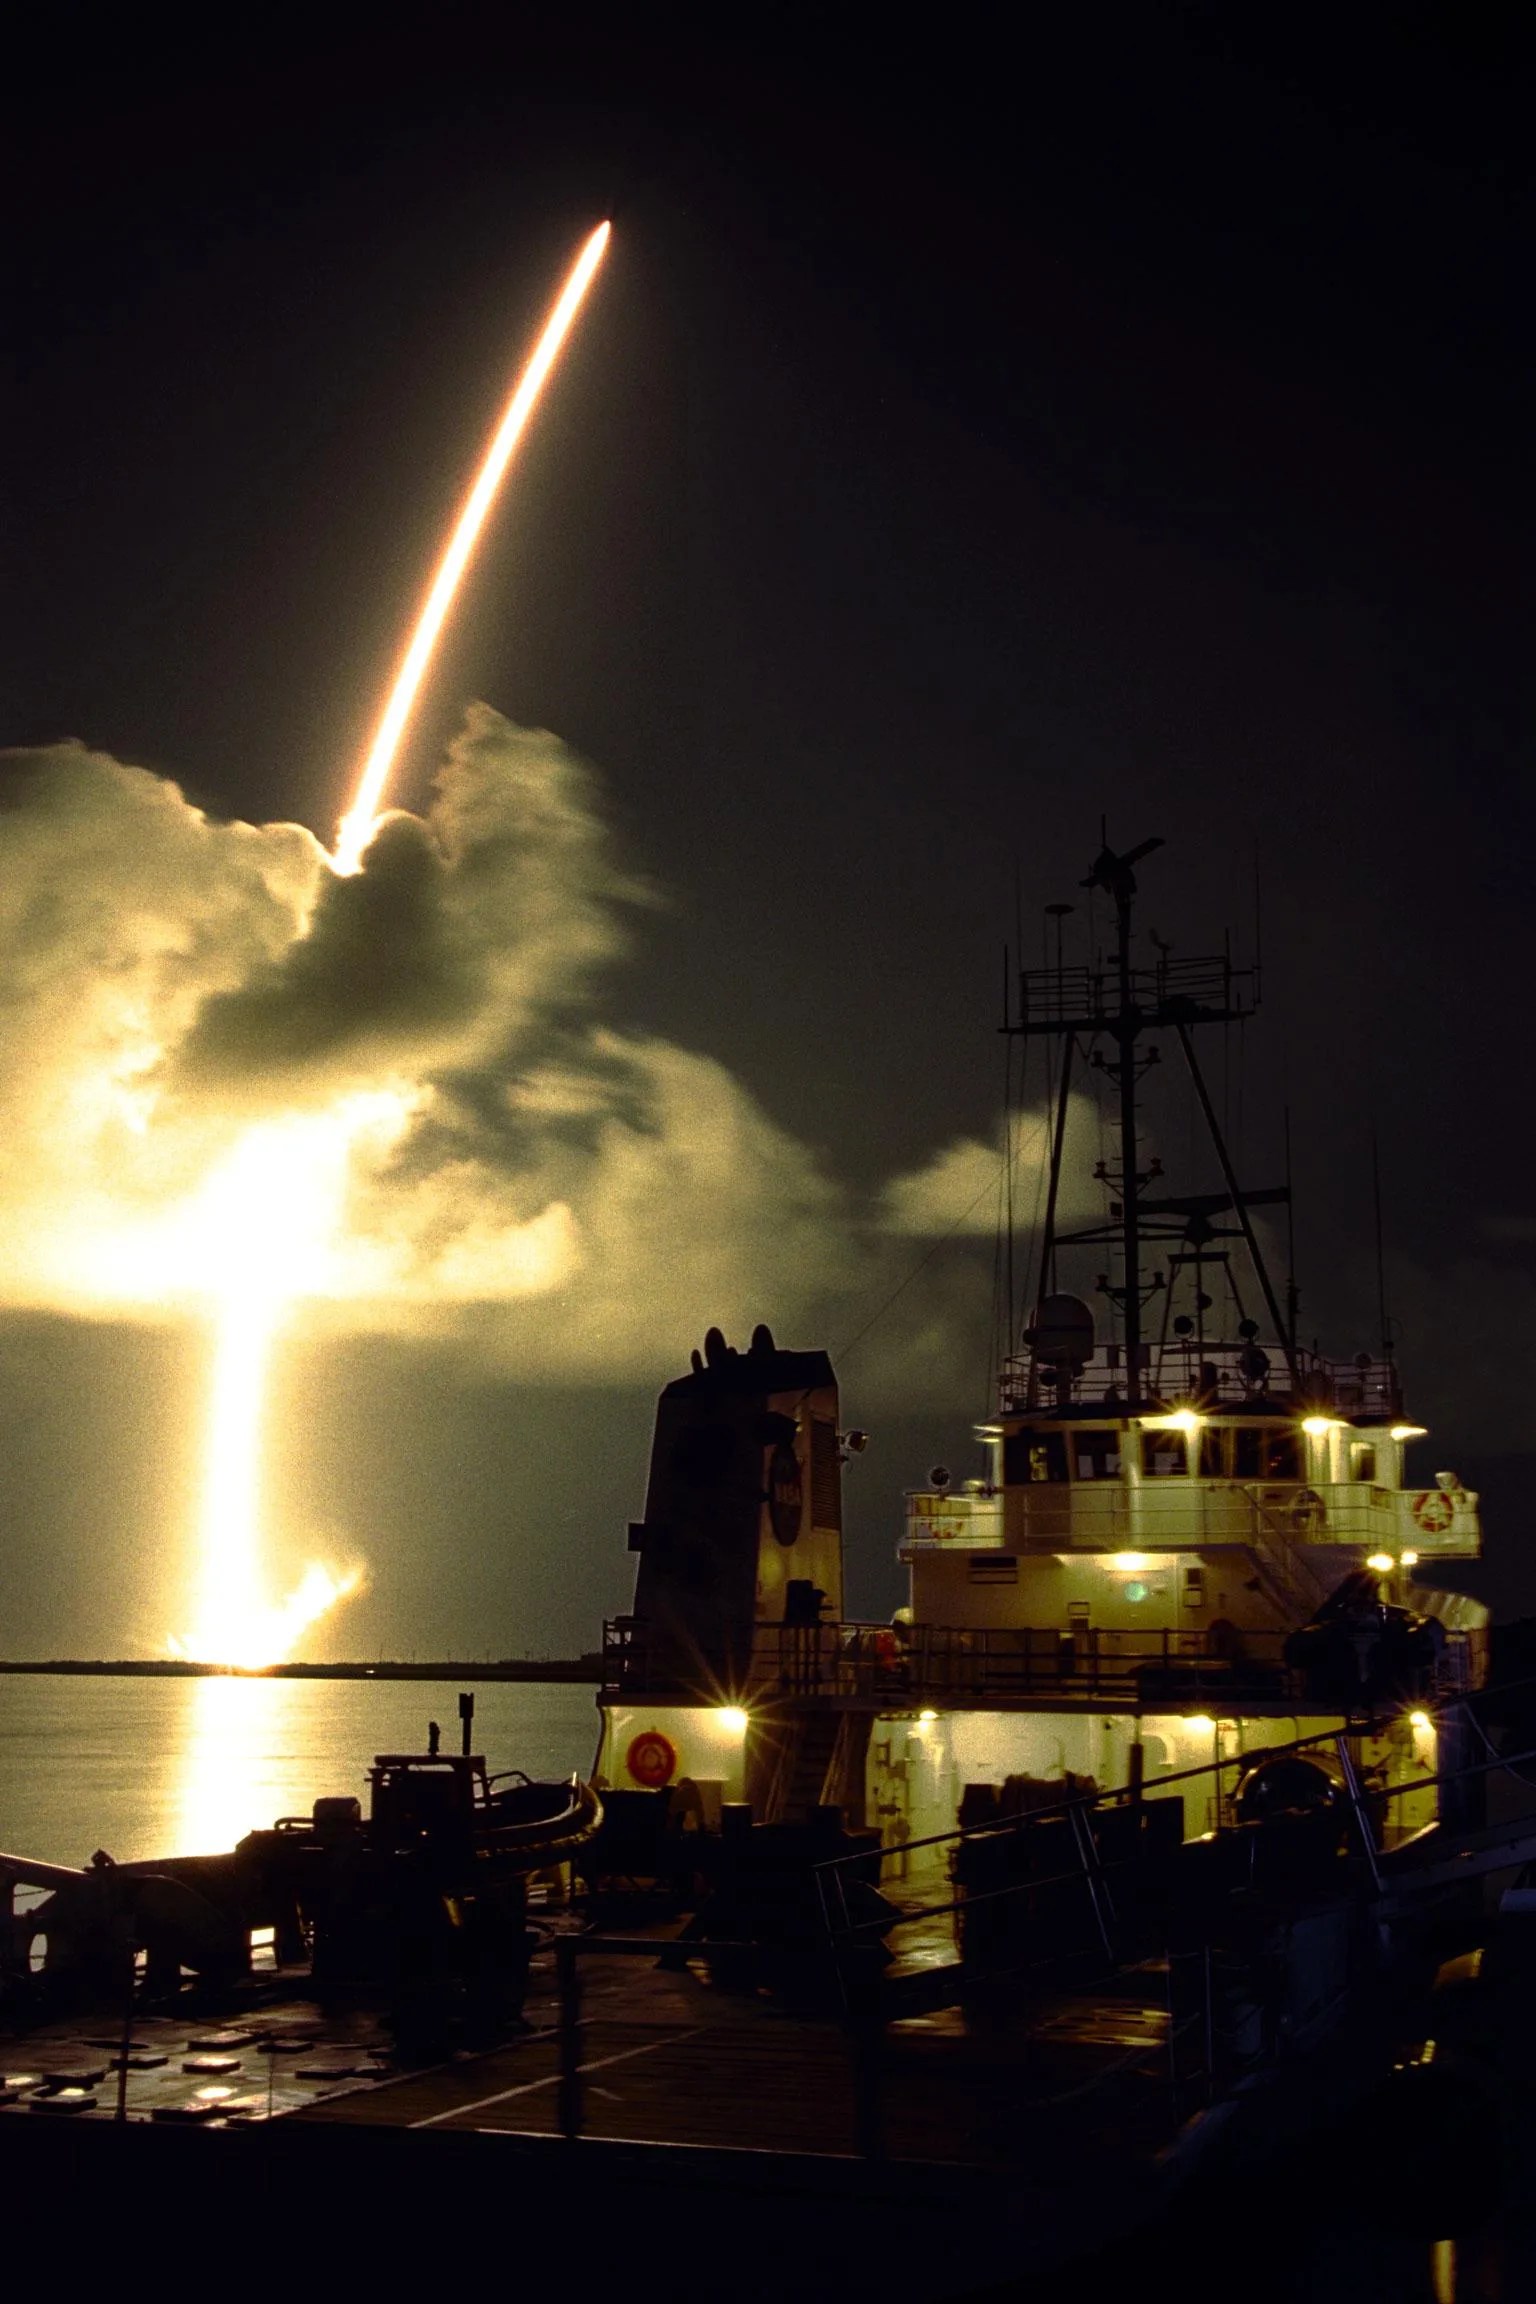 Timelapse image shows rocket streaking through a cloud.